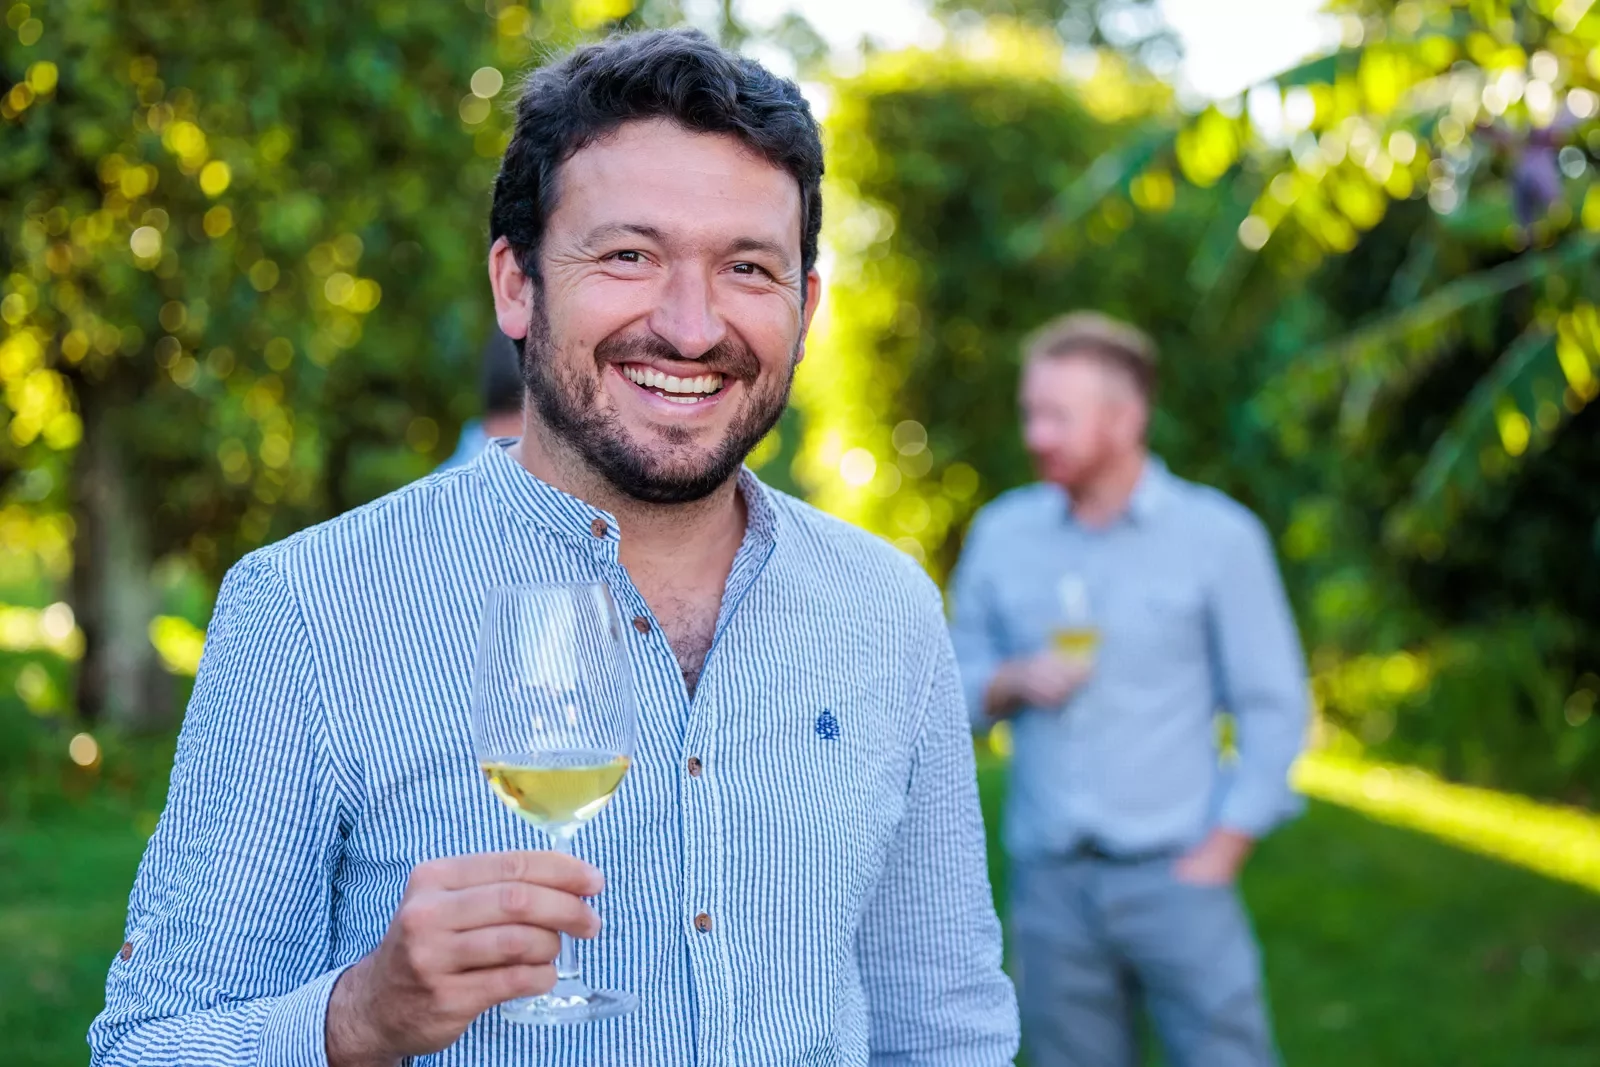 Man smiling at the camera while holding up a glass of wine